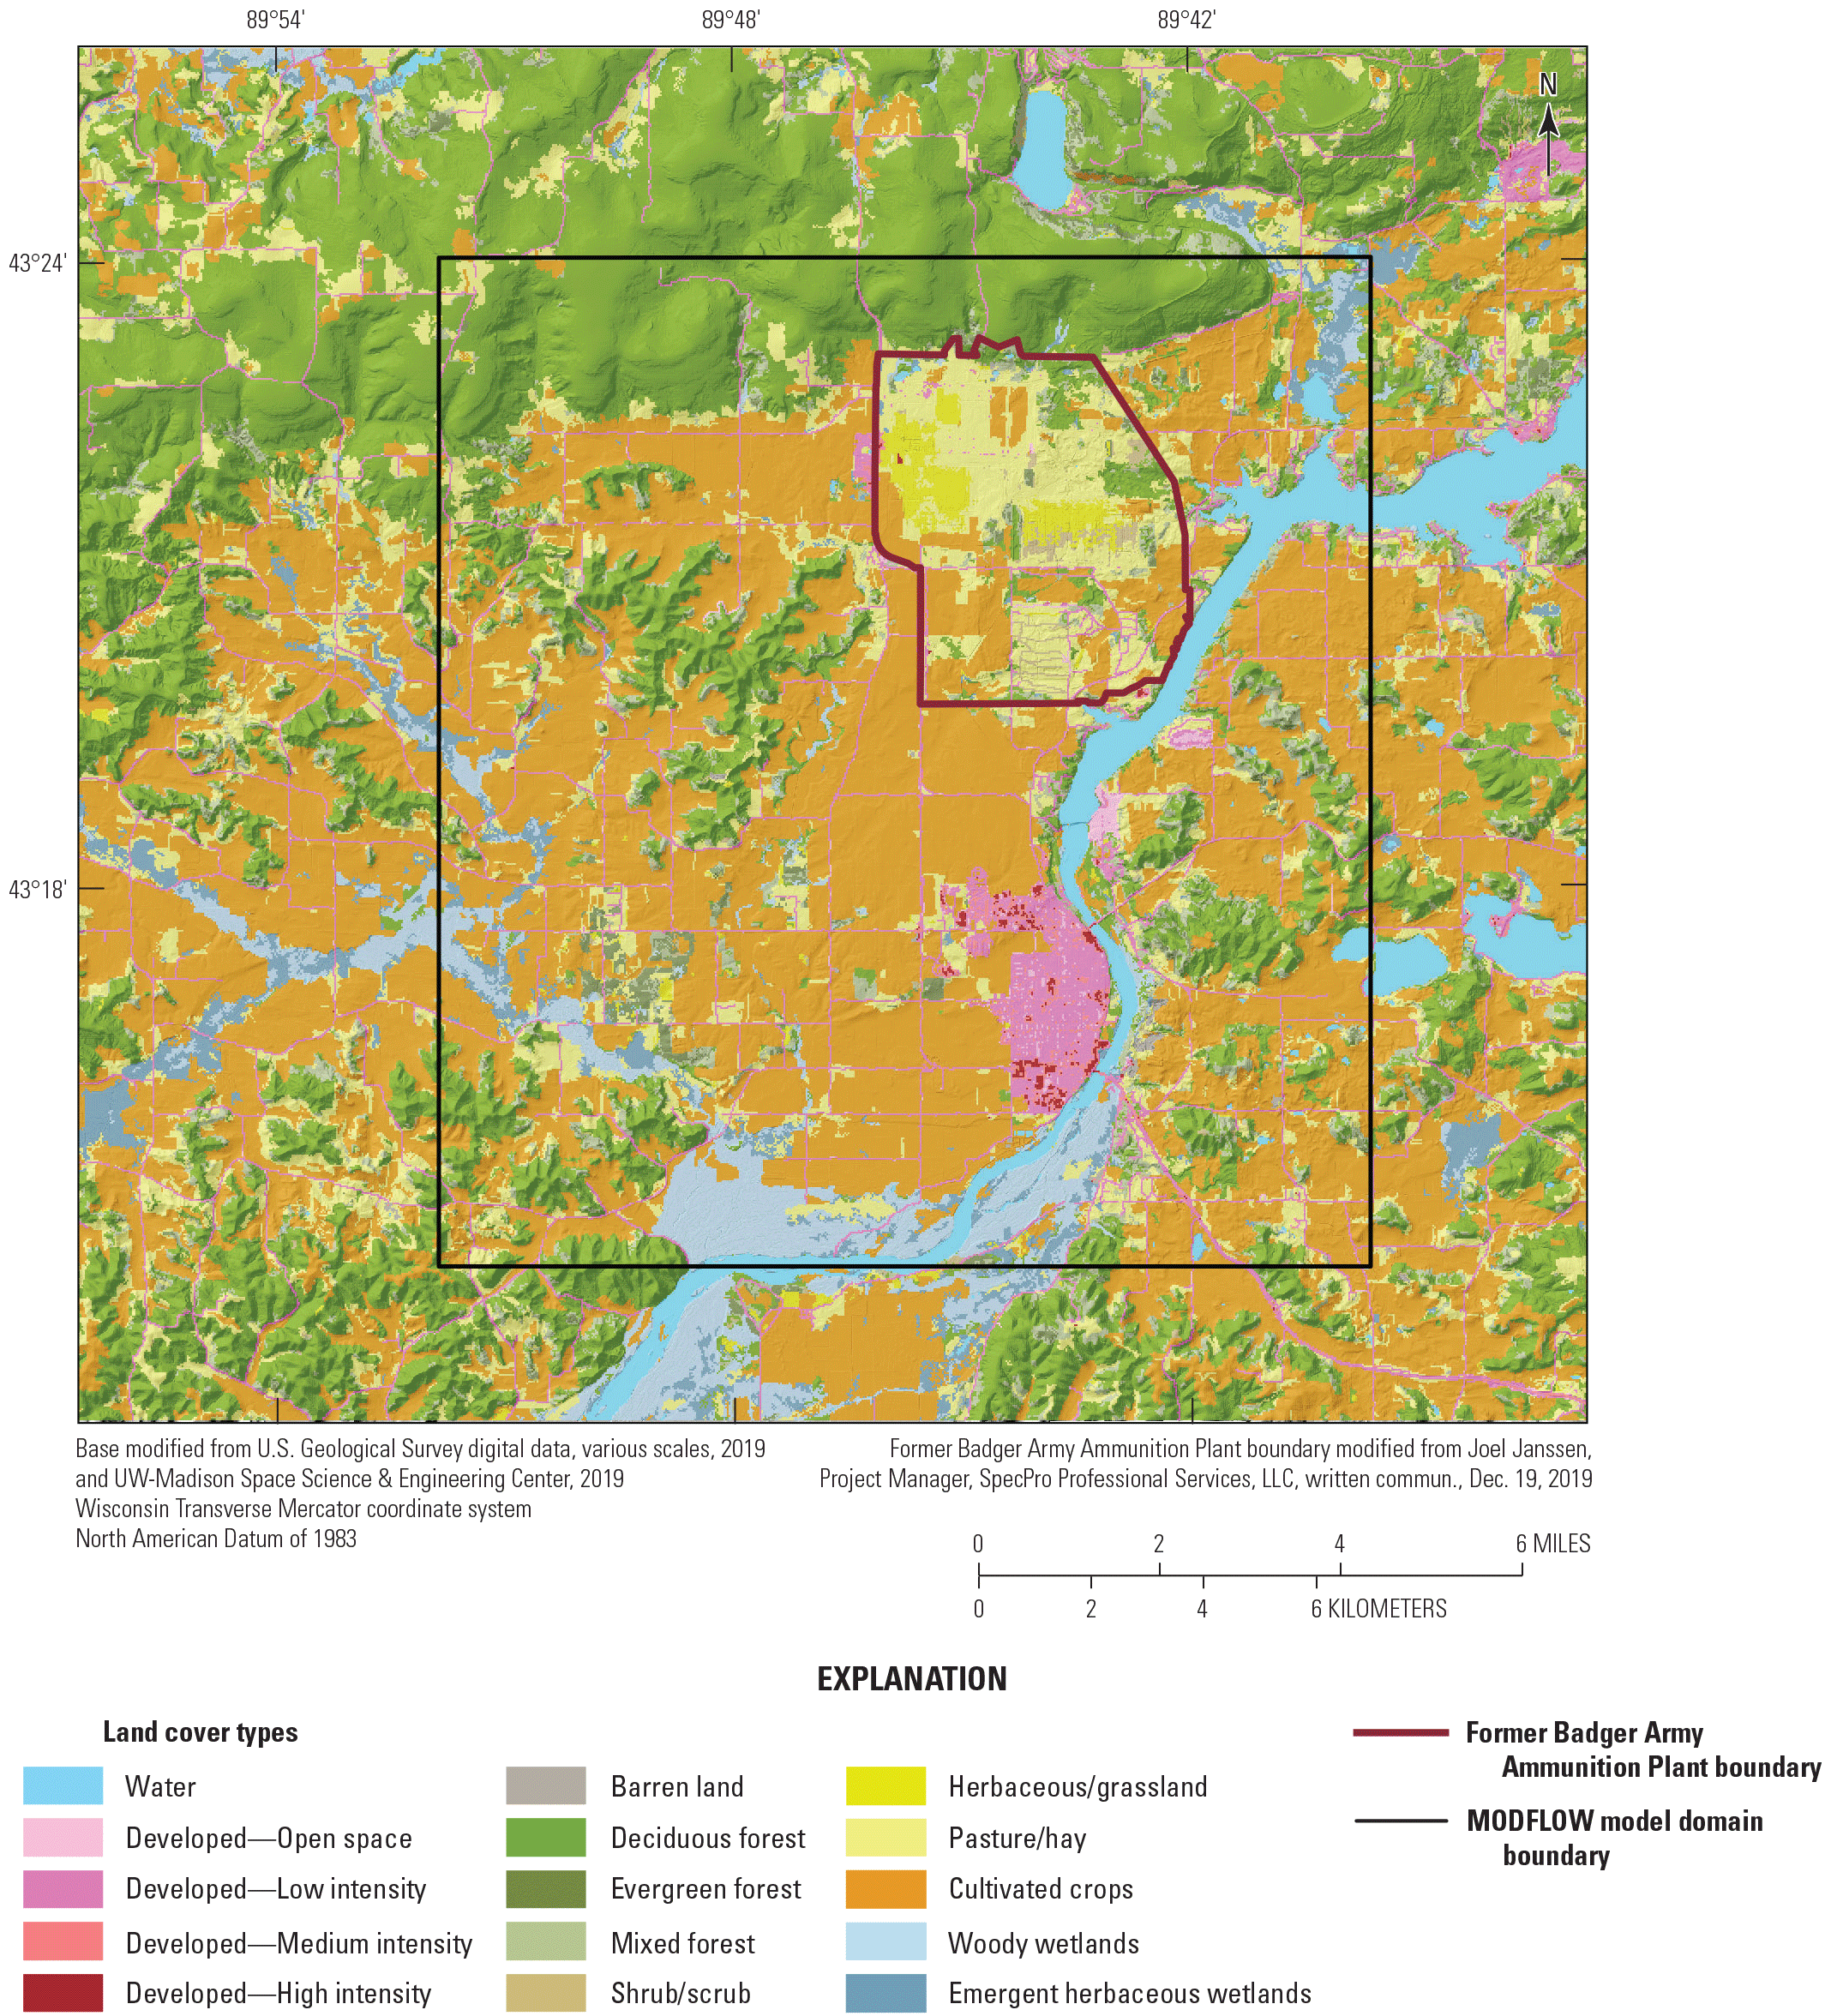 Land use in 2020 was mostly cultivated crops with forest covering topographic highs.
                  The former BAAP has little developed land now and shows a mix of pasture/hay and herbaceous/grassland.